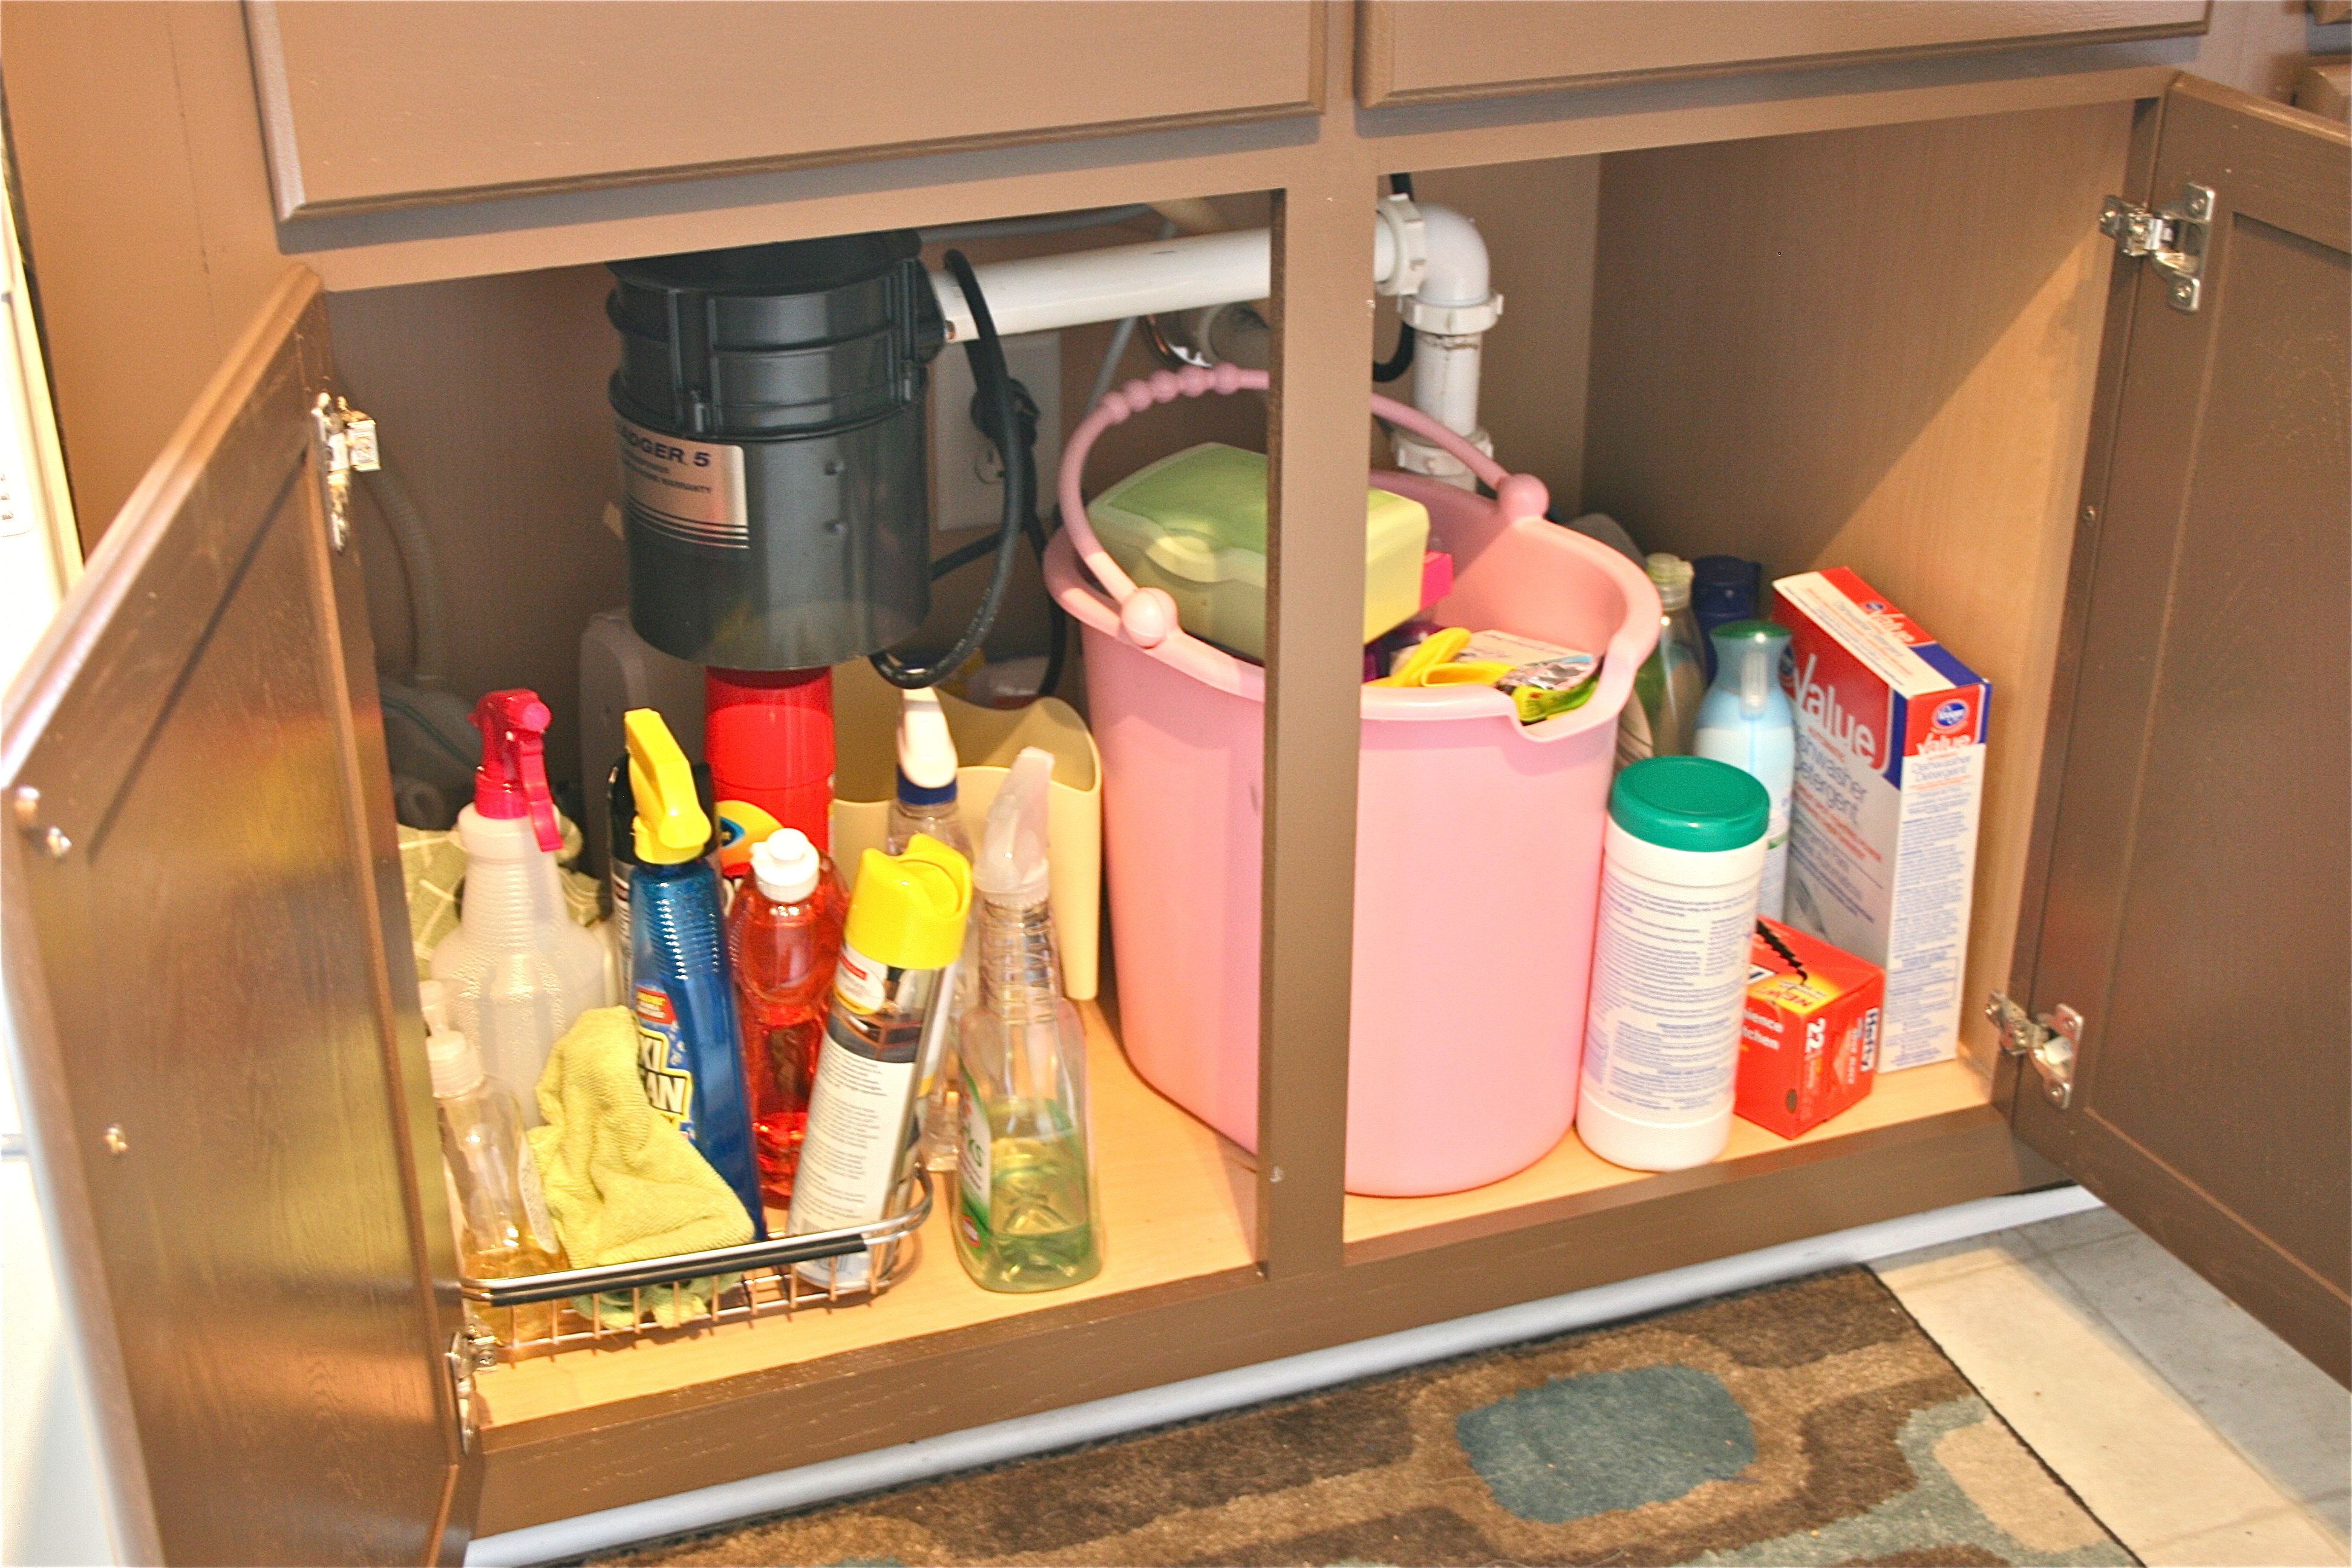 Pinspiration Monday: Shoe rack turned cleaning supply storage - Dream Green  DIY